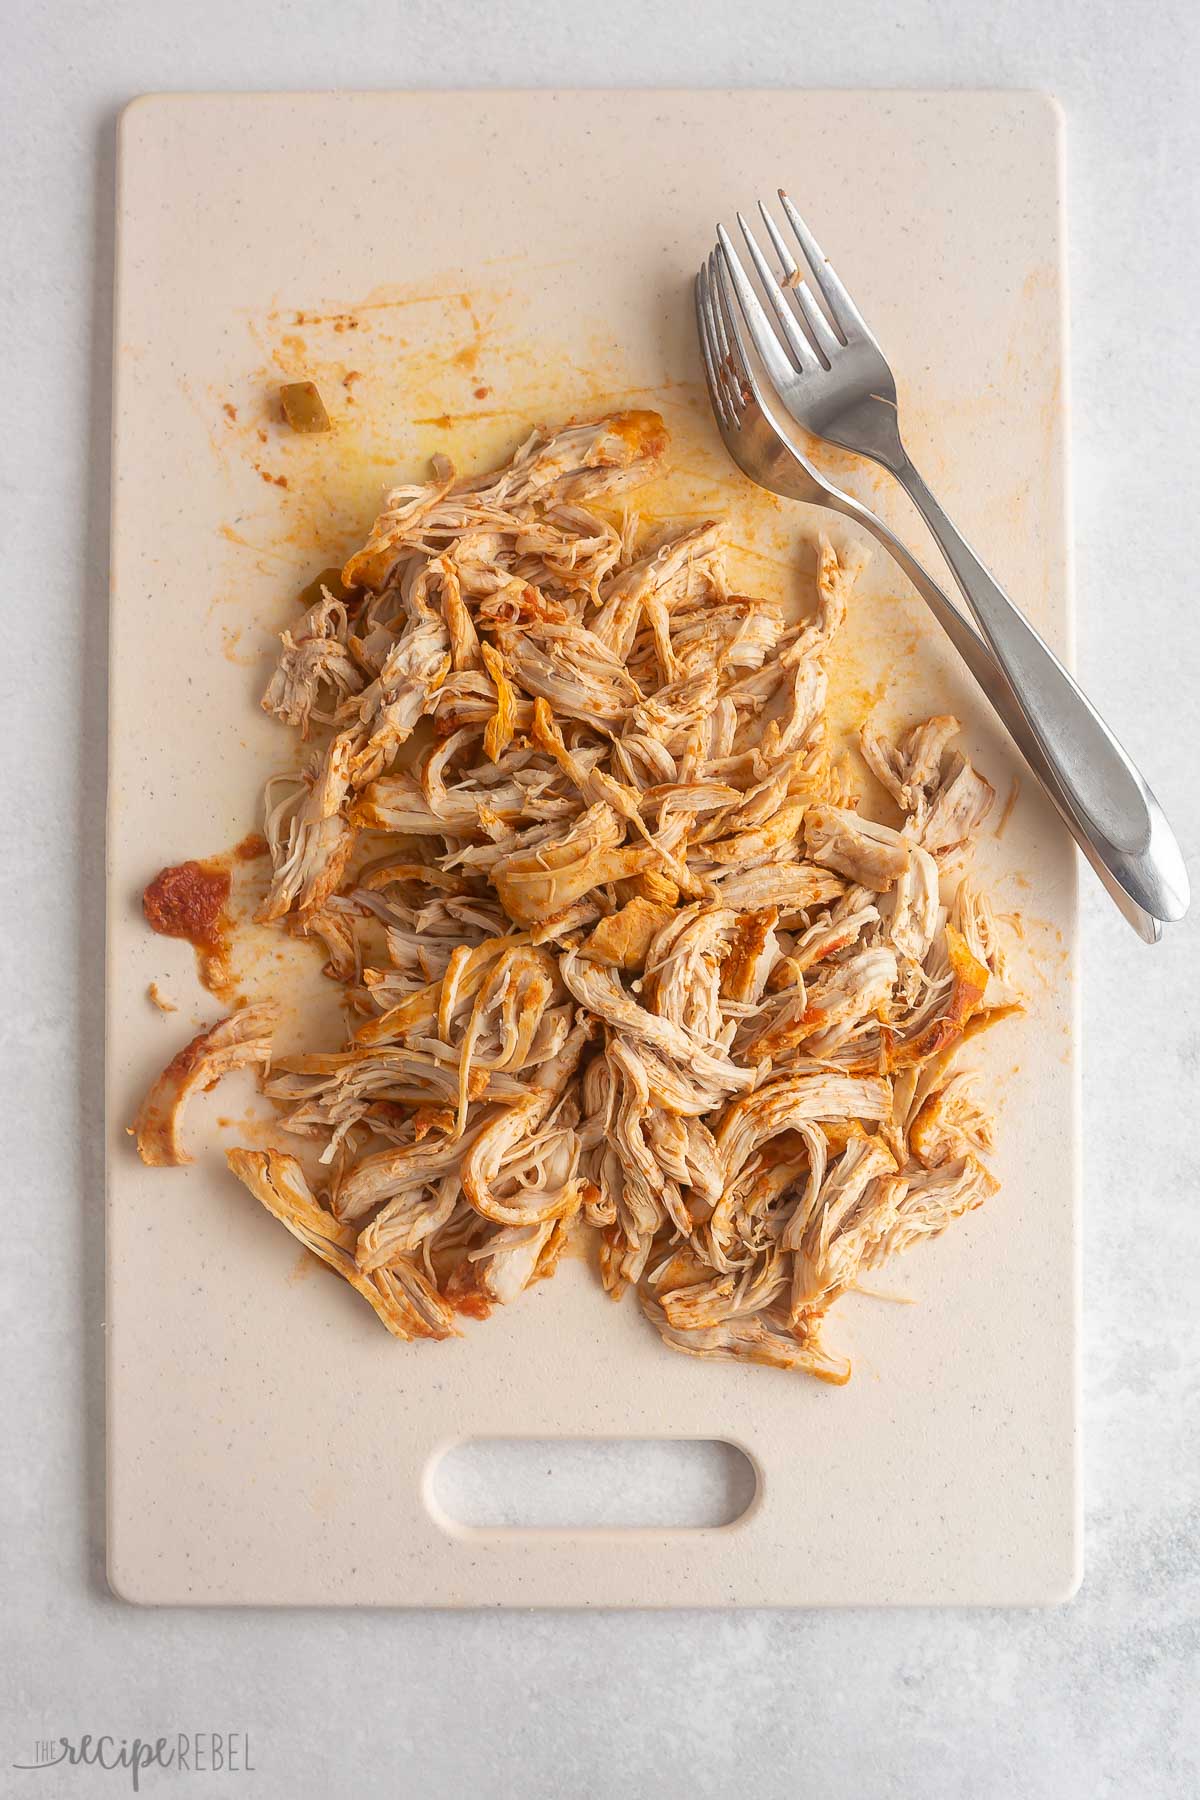 shredded chicken and two forks on a cutting board.